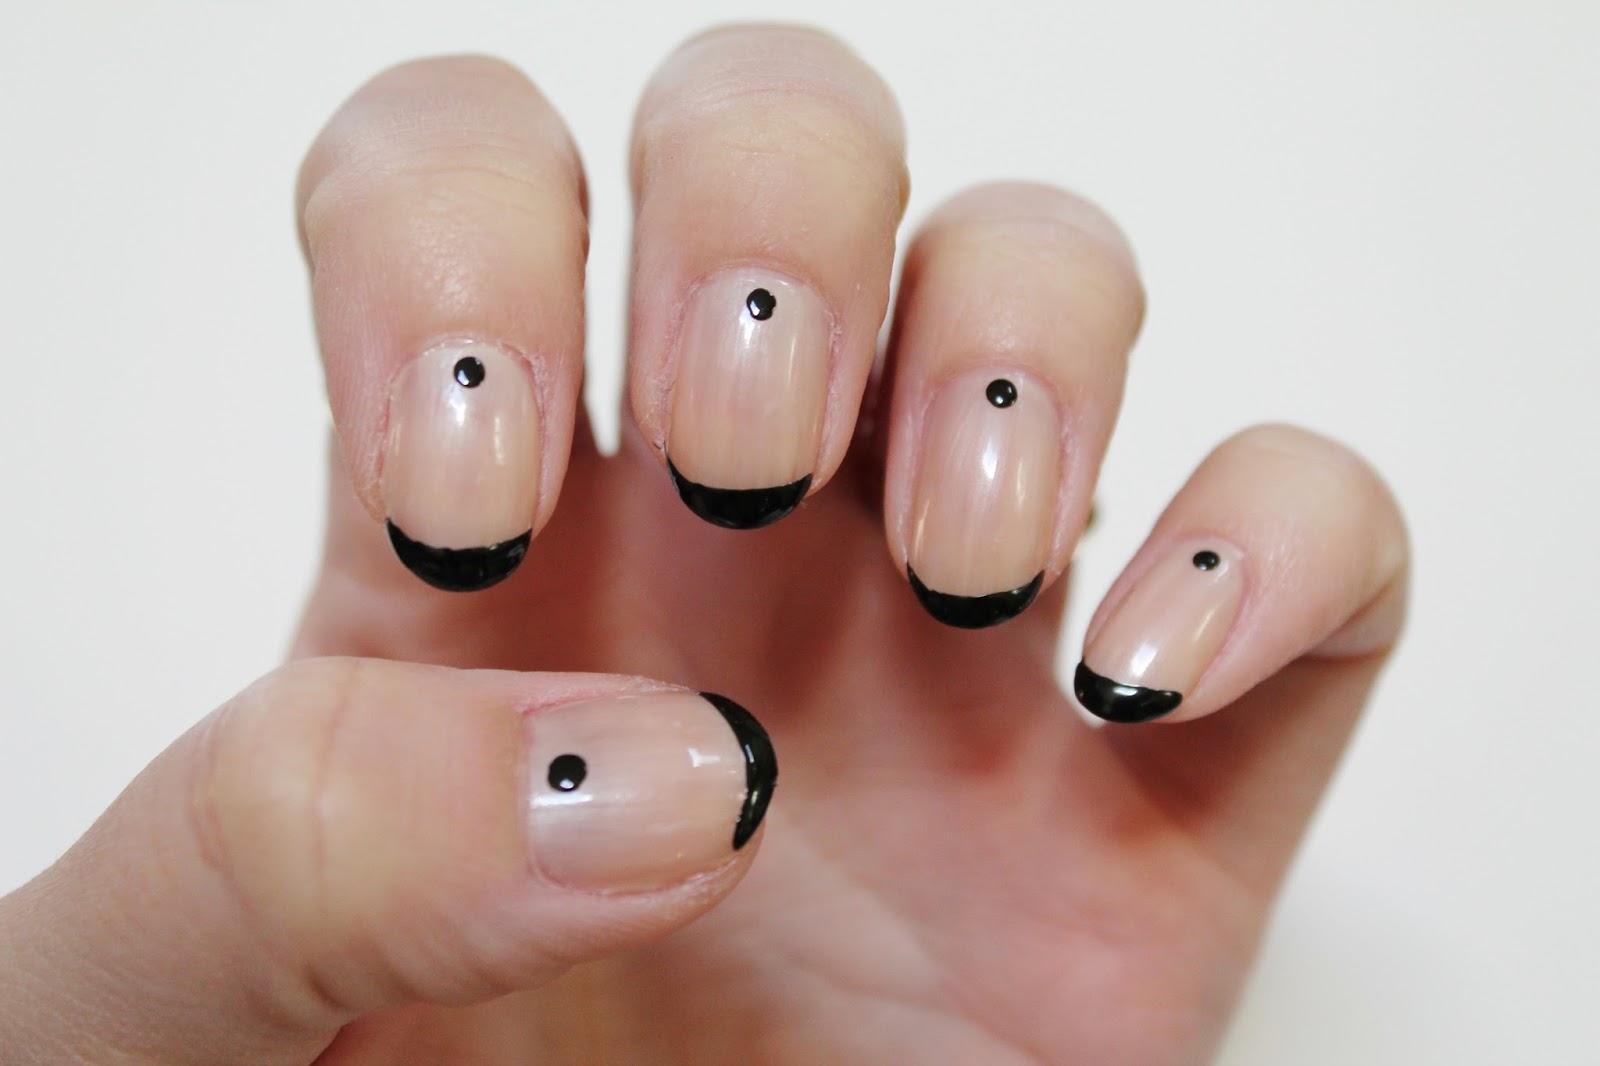 8. Elegant and Chic Nail Art Designs - wide 6